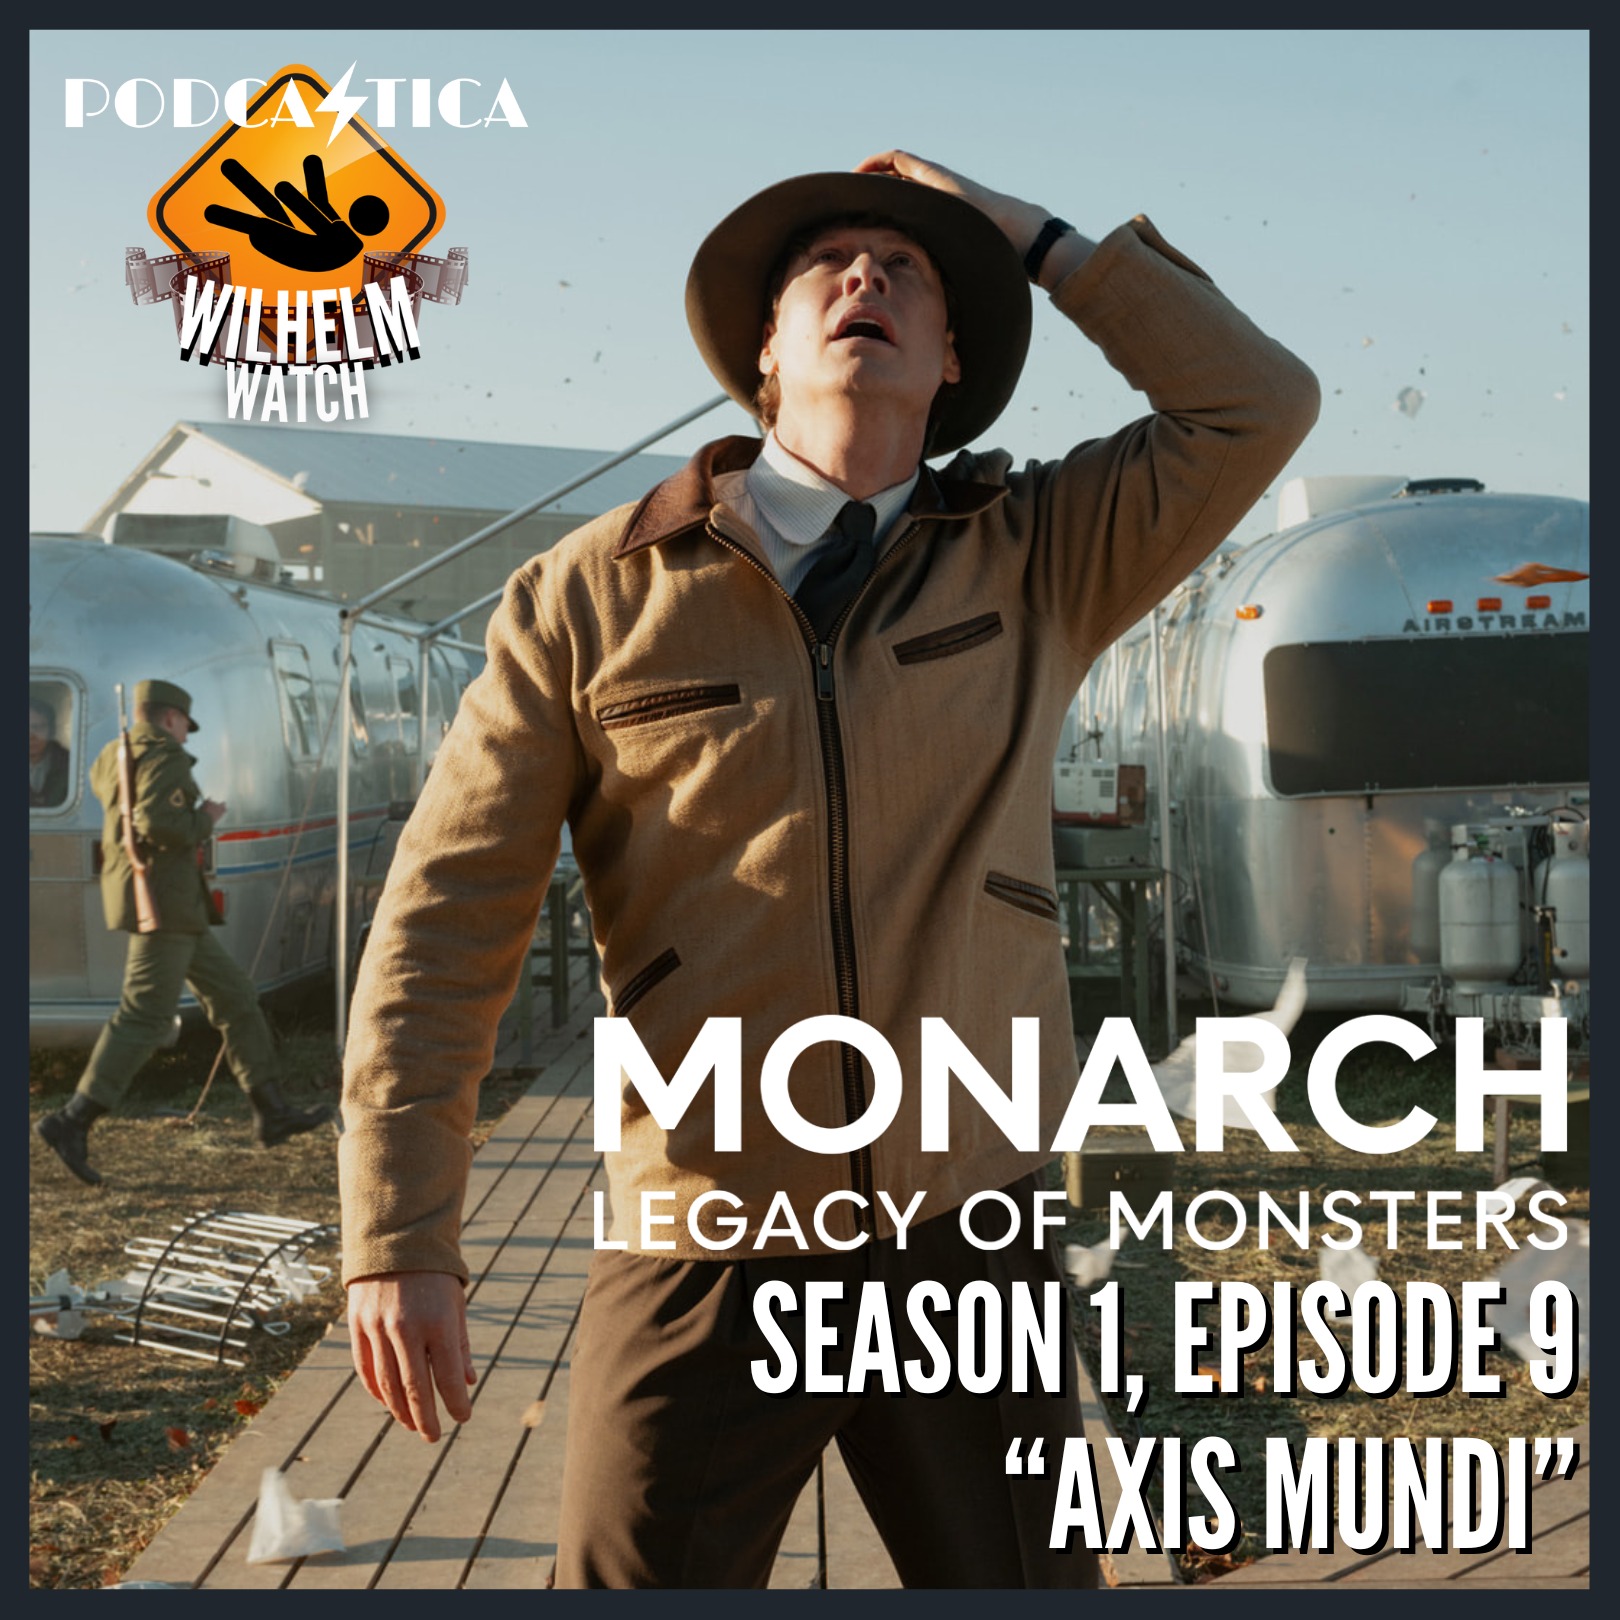 WILHELM WATCH / HOUSE PODCASTICA - Monarch: Legacy of Monsters S01E09 